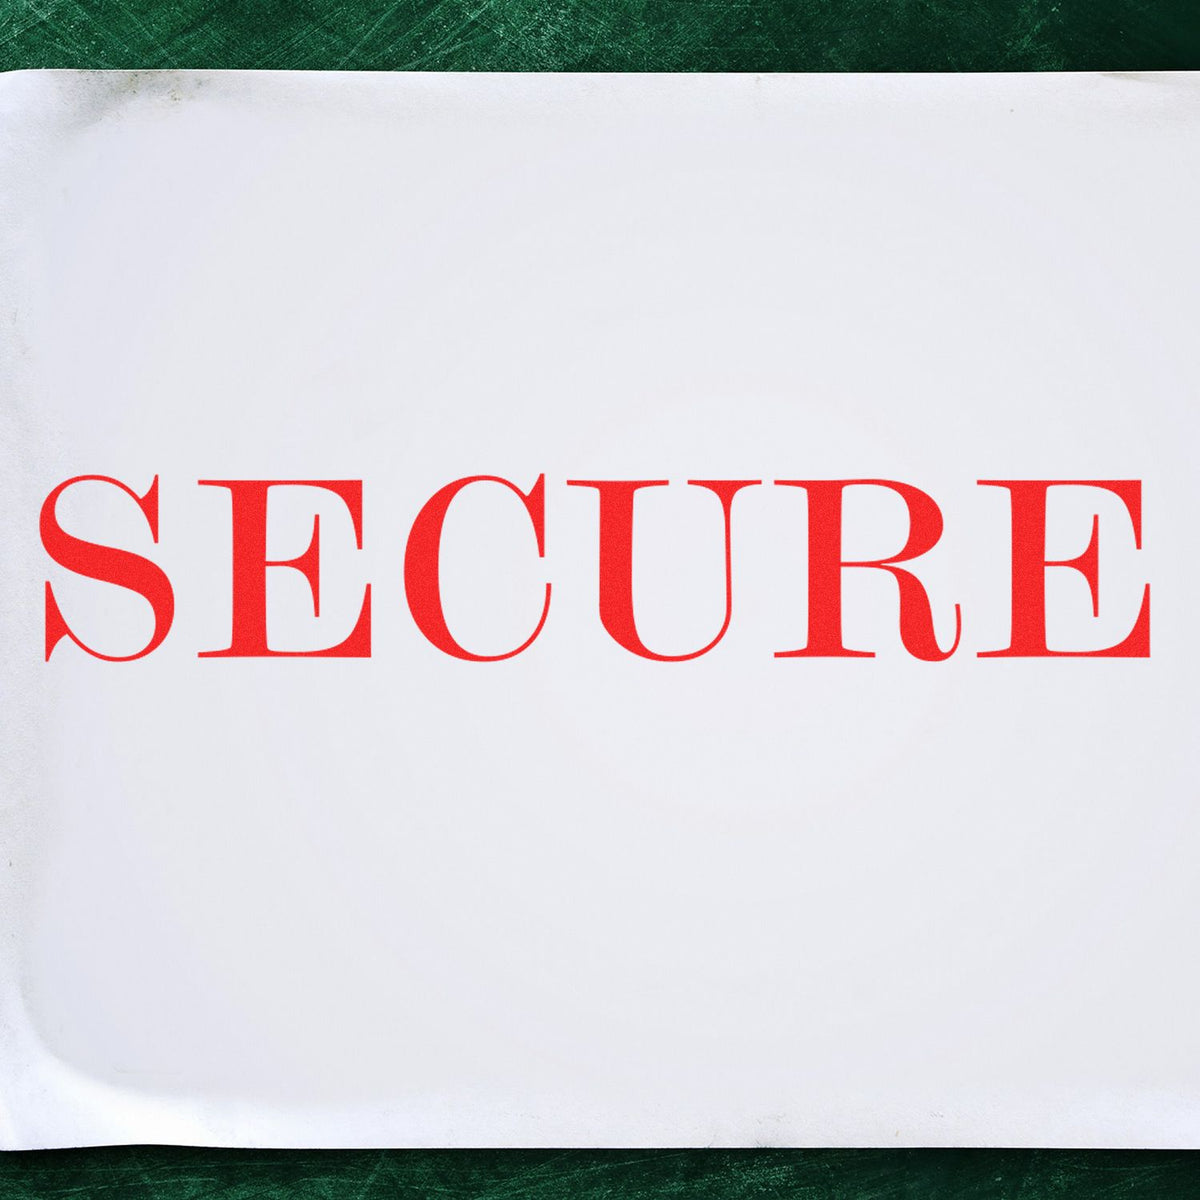 Large Secure Rubber Stamp In Use Photo